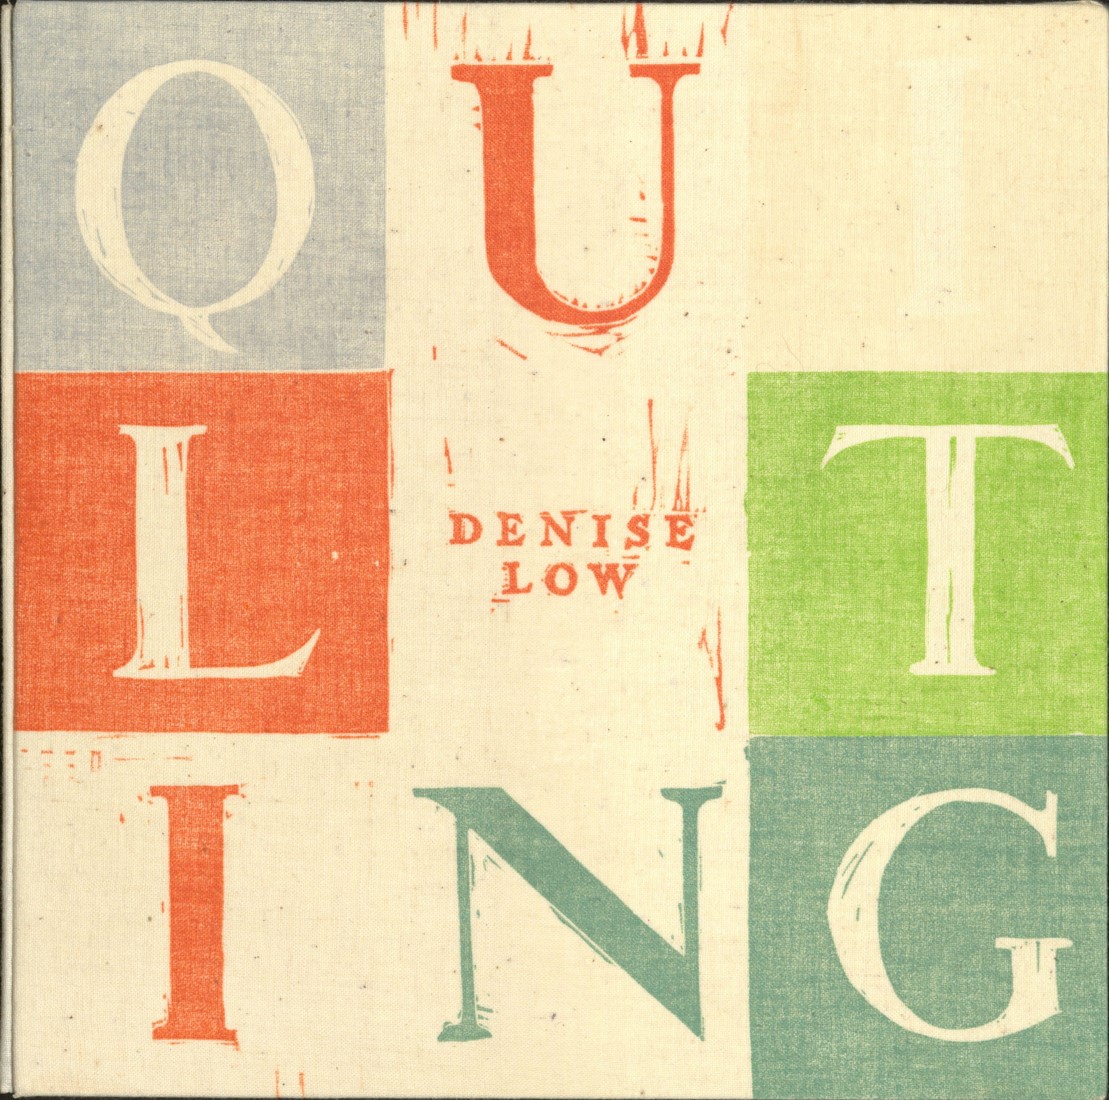 Square divided into nine square blocks of different muted colors. The author's name is in the center block. Each letter of the word "Quilting" is in a different block, starting in the upper left corner and going clockwise.